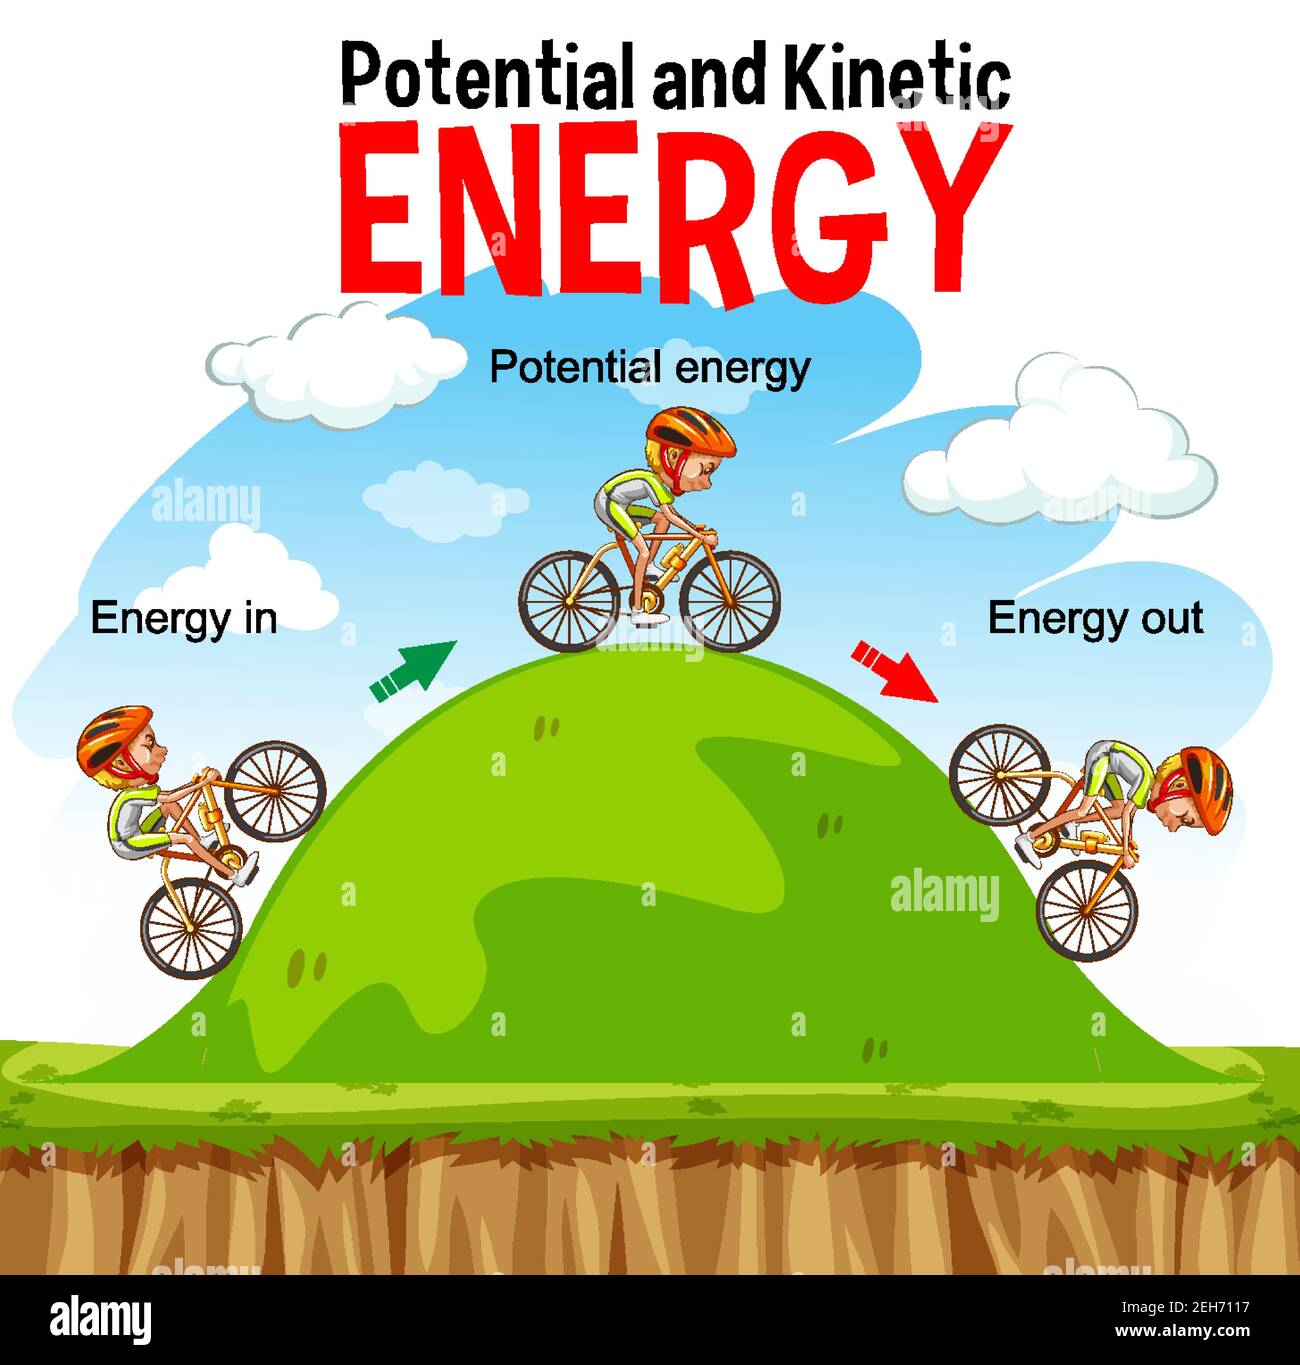 Potential And Kinetic Energy Diagram Illustration Stock Vector Image Art Alamy